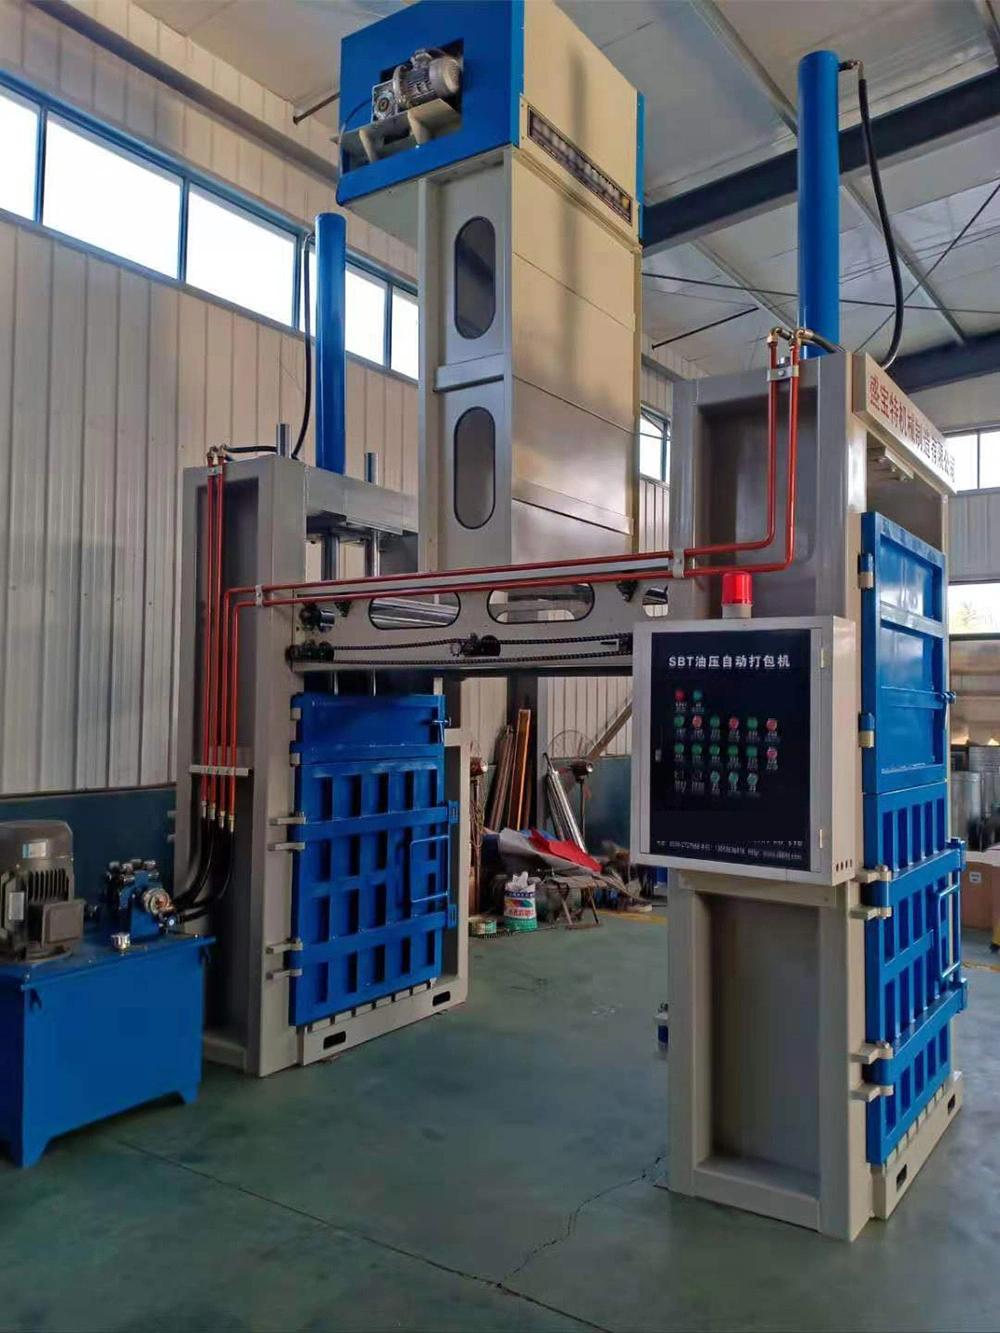 CE Certified Medium-Sized Vertical Baler Waste Paper Hydraulic Press for Packaging Cartons/Corrugated Cartons/Plastic Film/Blister Film/Paper Recycling